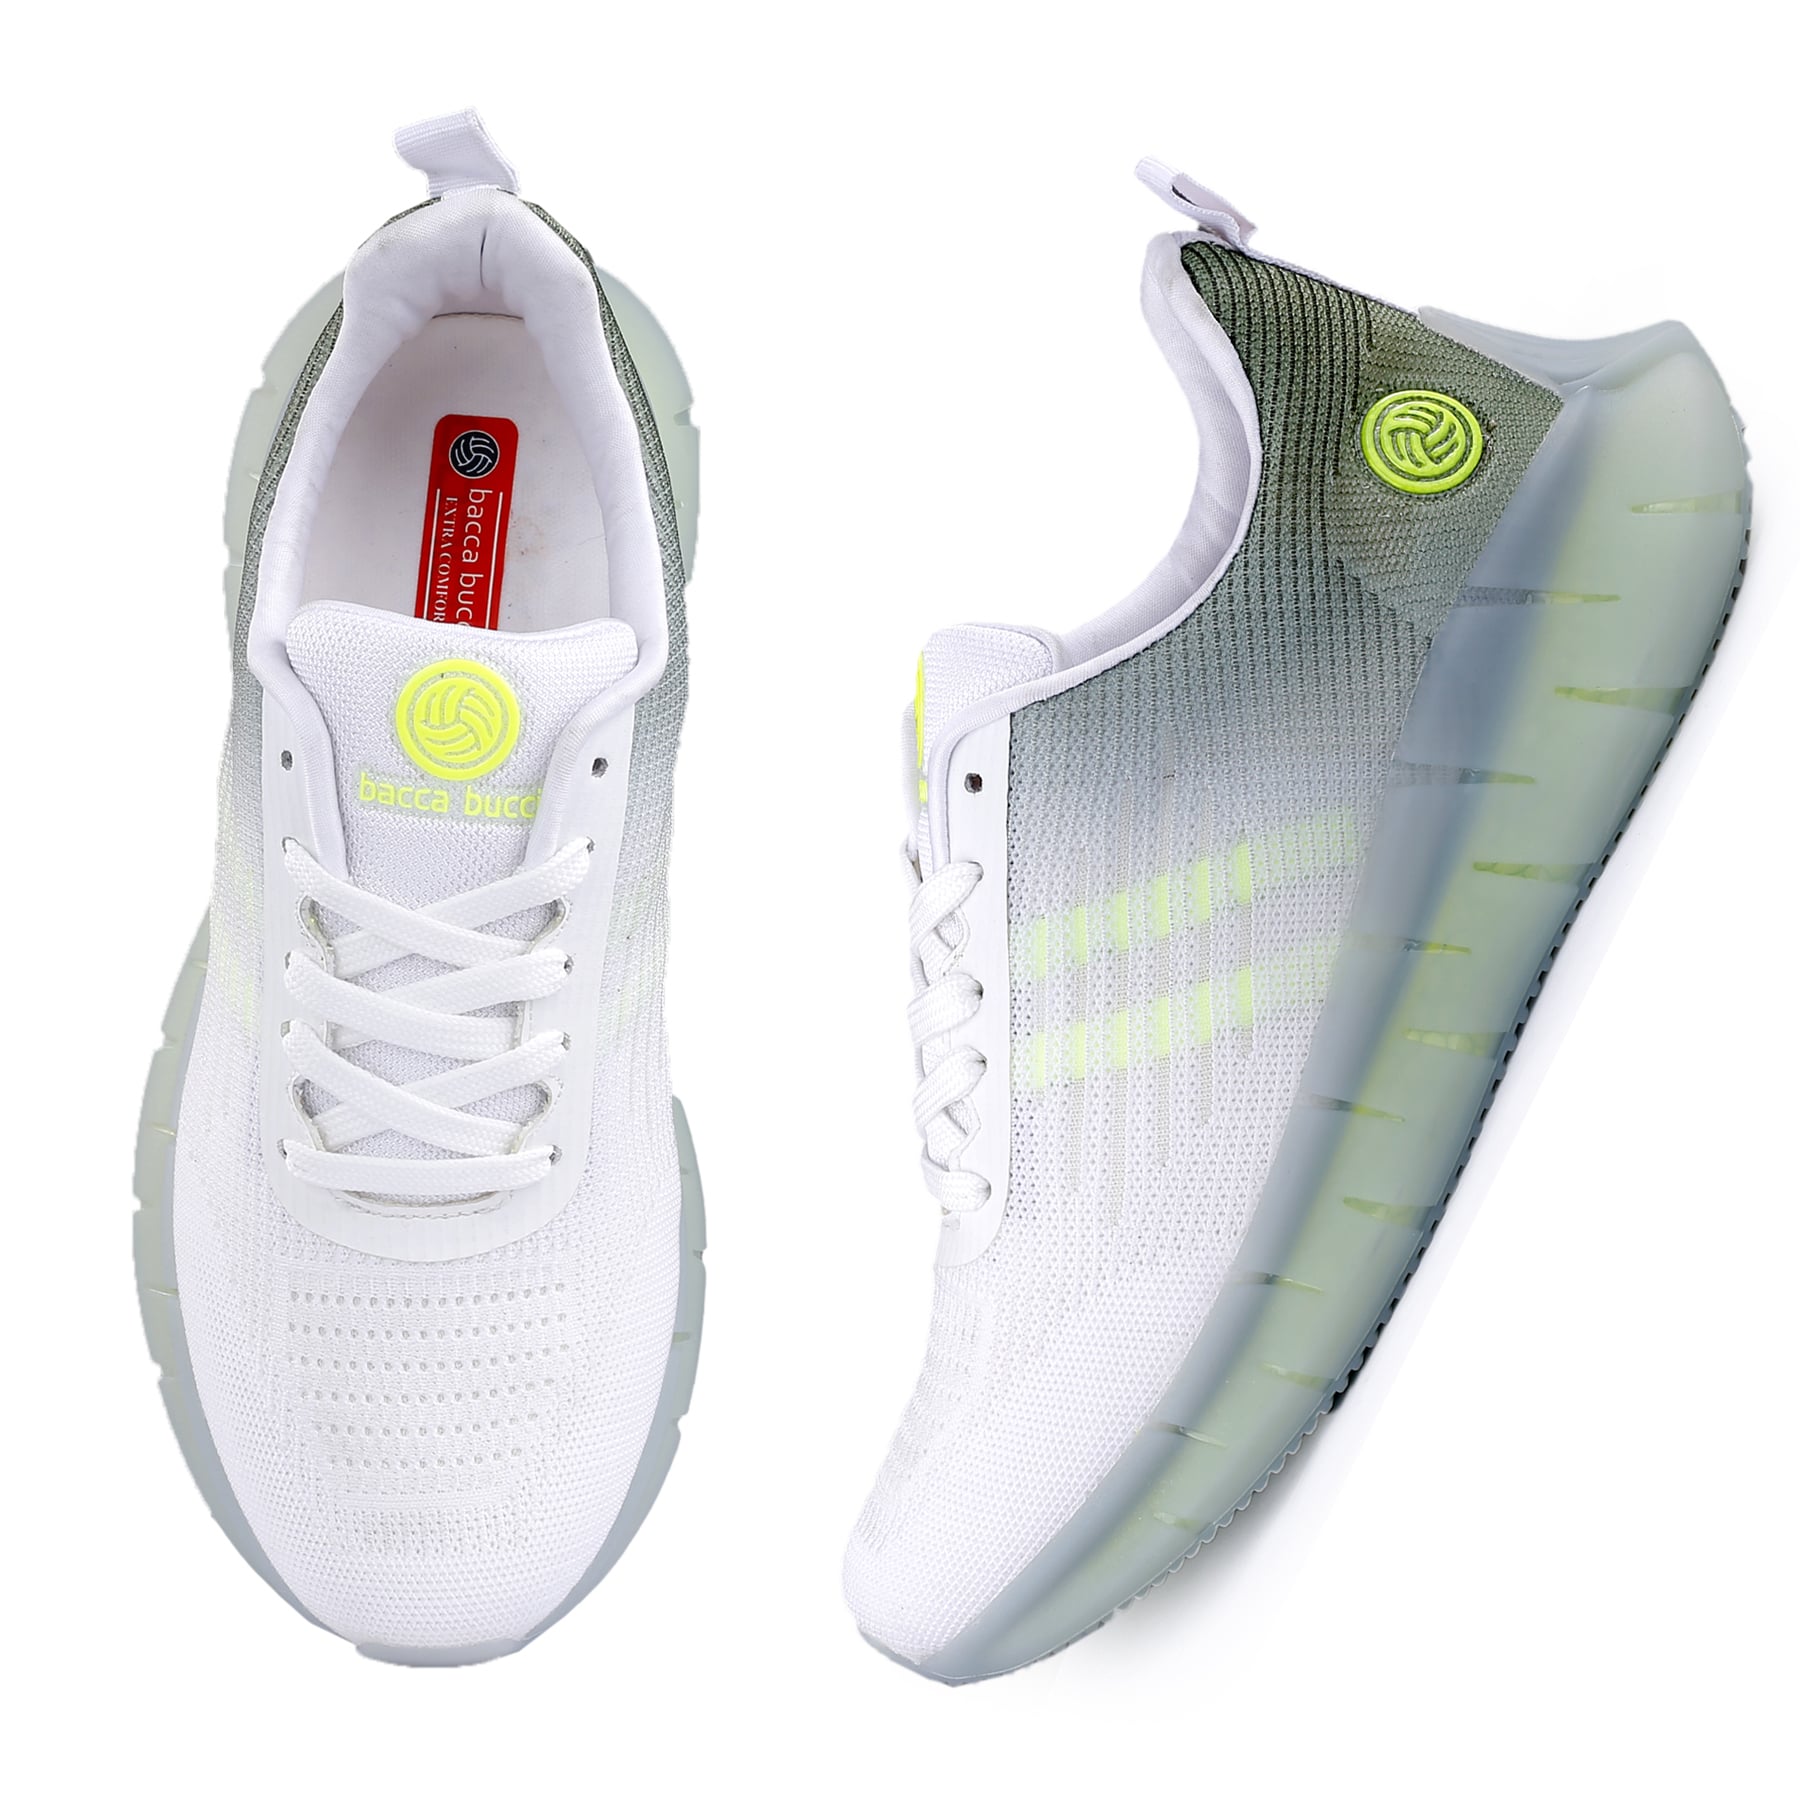 Bacca Bucci CHAMPION Running Sports Shoes | Lightweight & Sungfit for an Energetic Ride